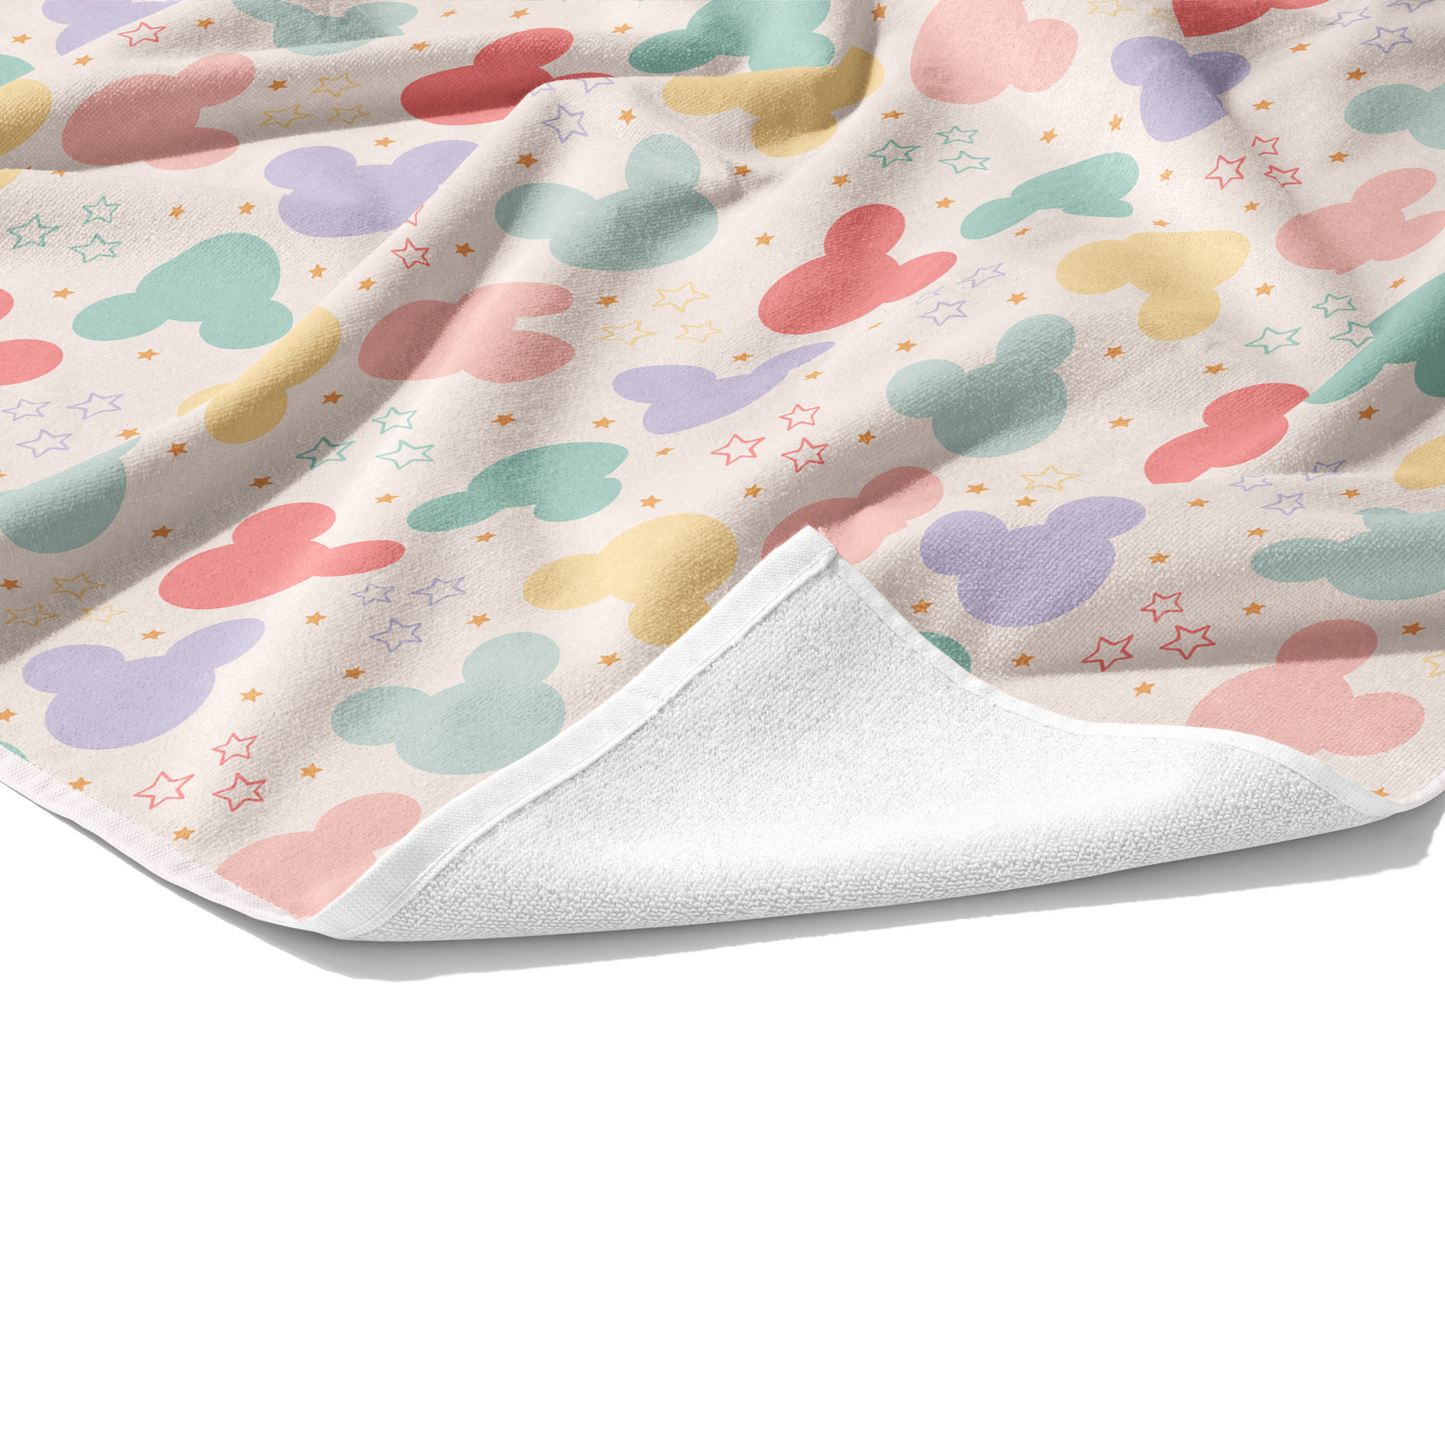 Cream Mouse themed beach towel with stars and pastel mouse heads scattered throughout 